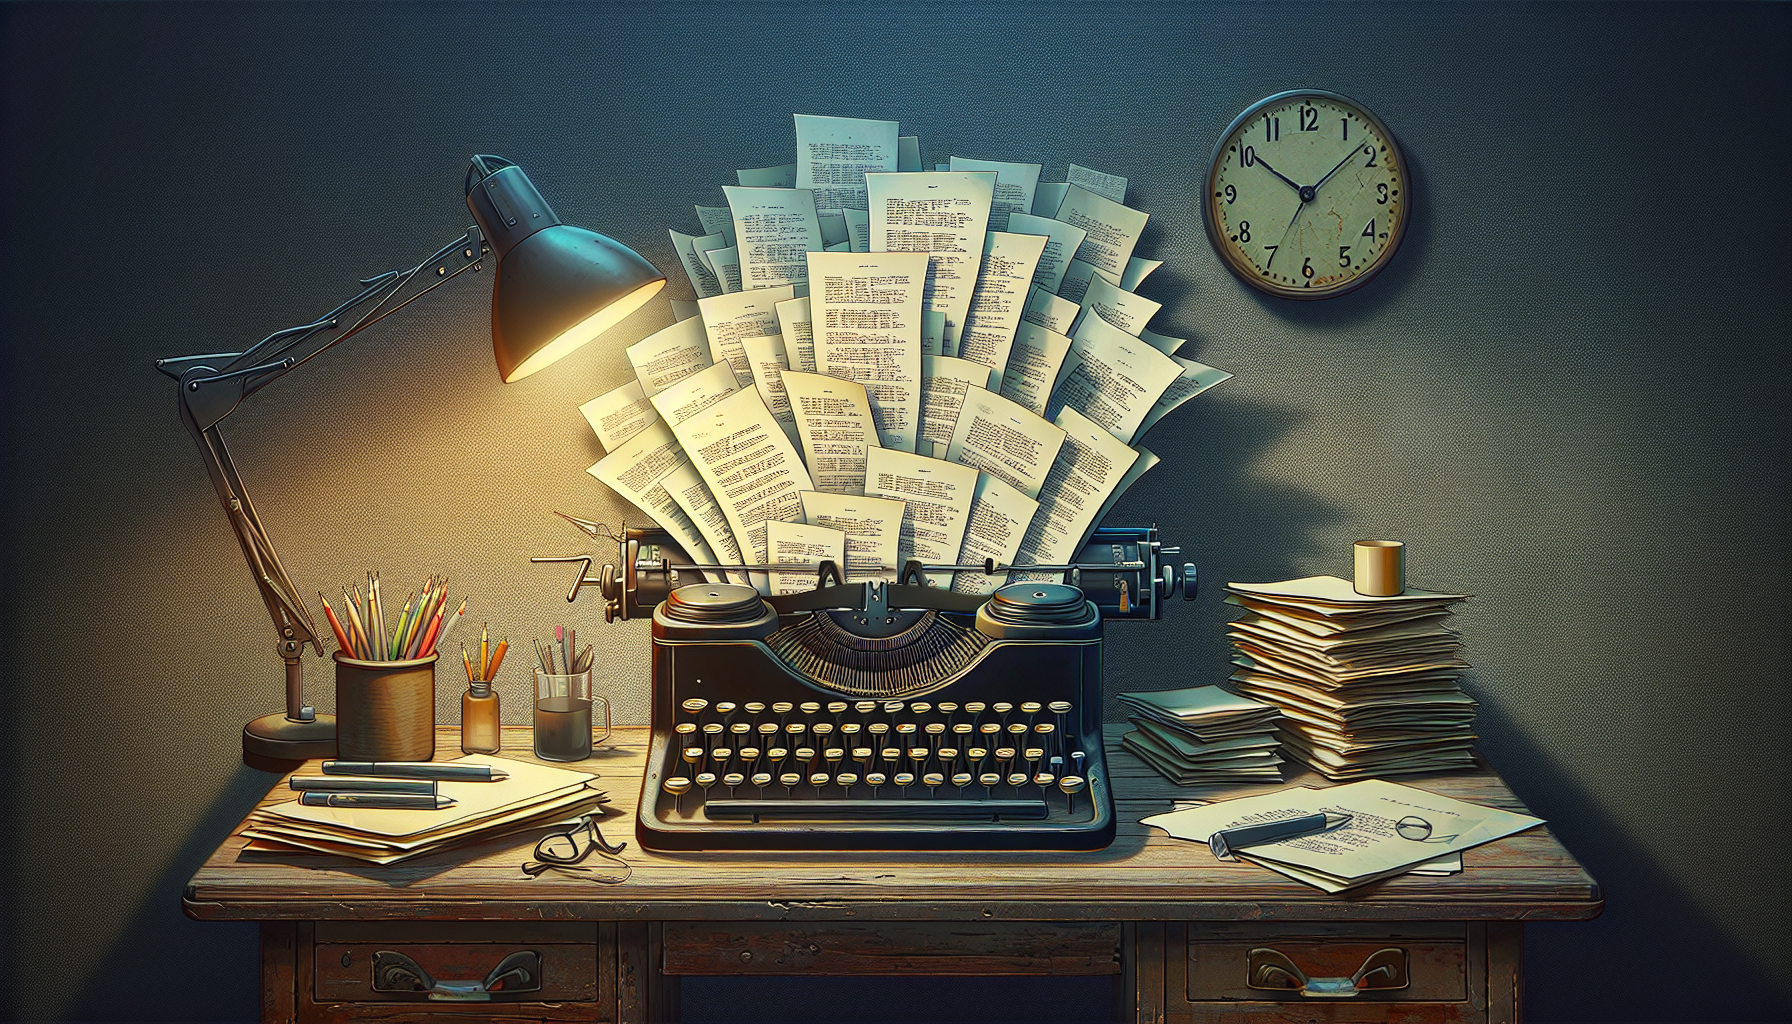 A minimalist vintage typewriter on a well-worn wooden desk, surrounded by scattered screenplay pages with visible edits and annotations, a glowing desk lamp casting a warm light, and a wall clock show